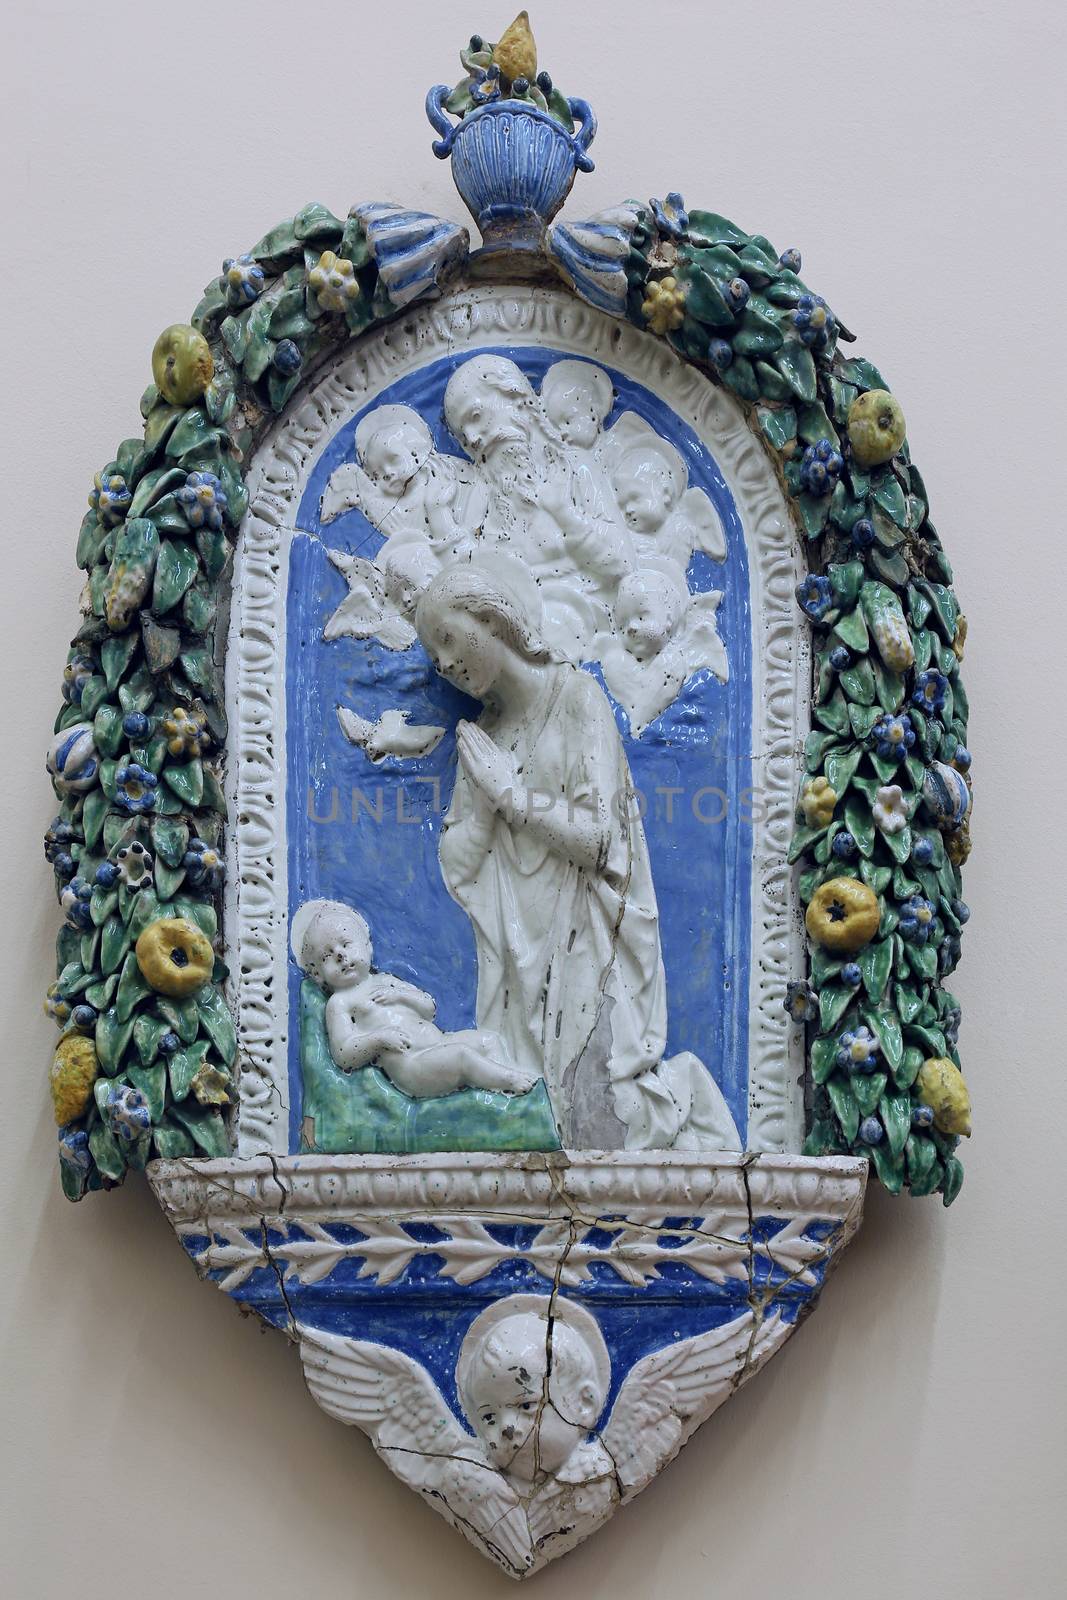 The workshop of Andrea della Robbia: The Birth of Jesus, Old Masters Collection, Croatian Academy of Sciences in Zagreb, Croatia